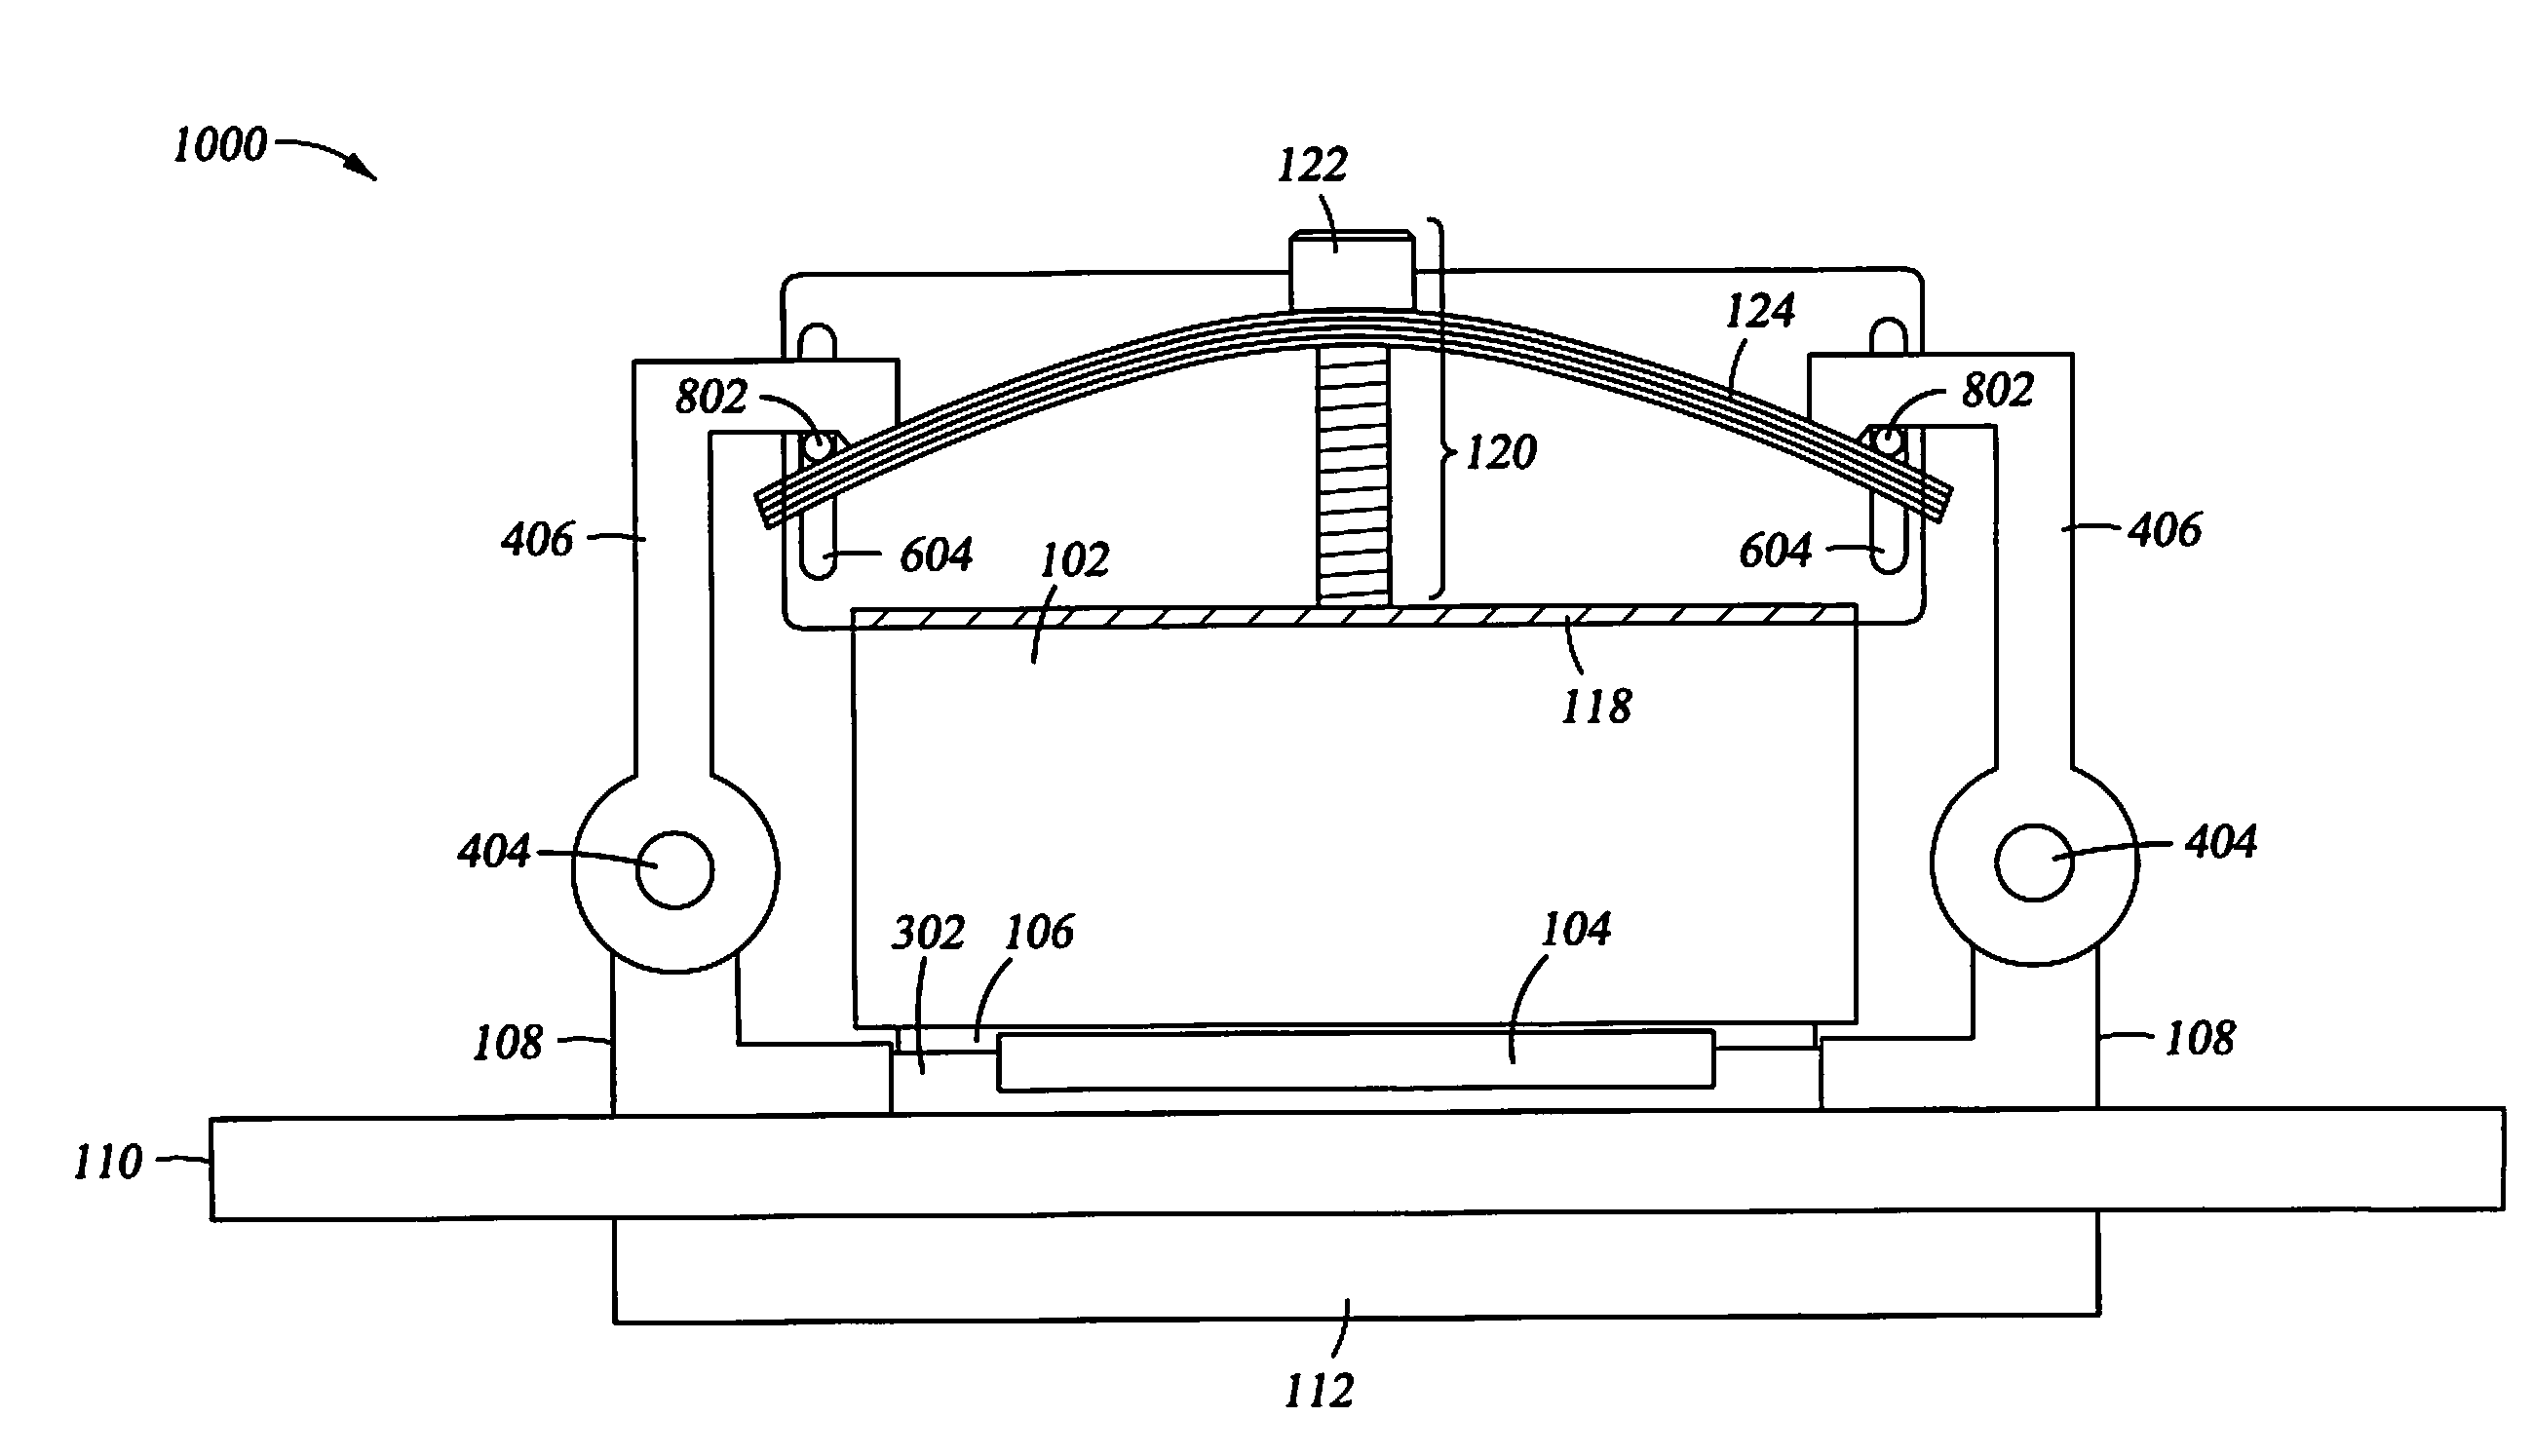 Heatsink Apparatus for Applying a Specified Compressive Force to an Integrated Circuit Device